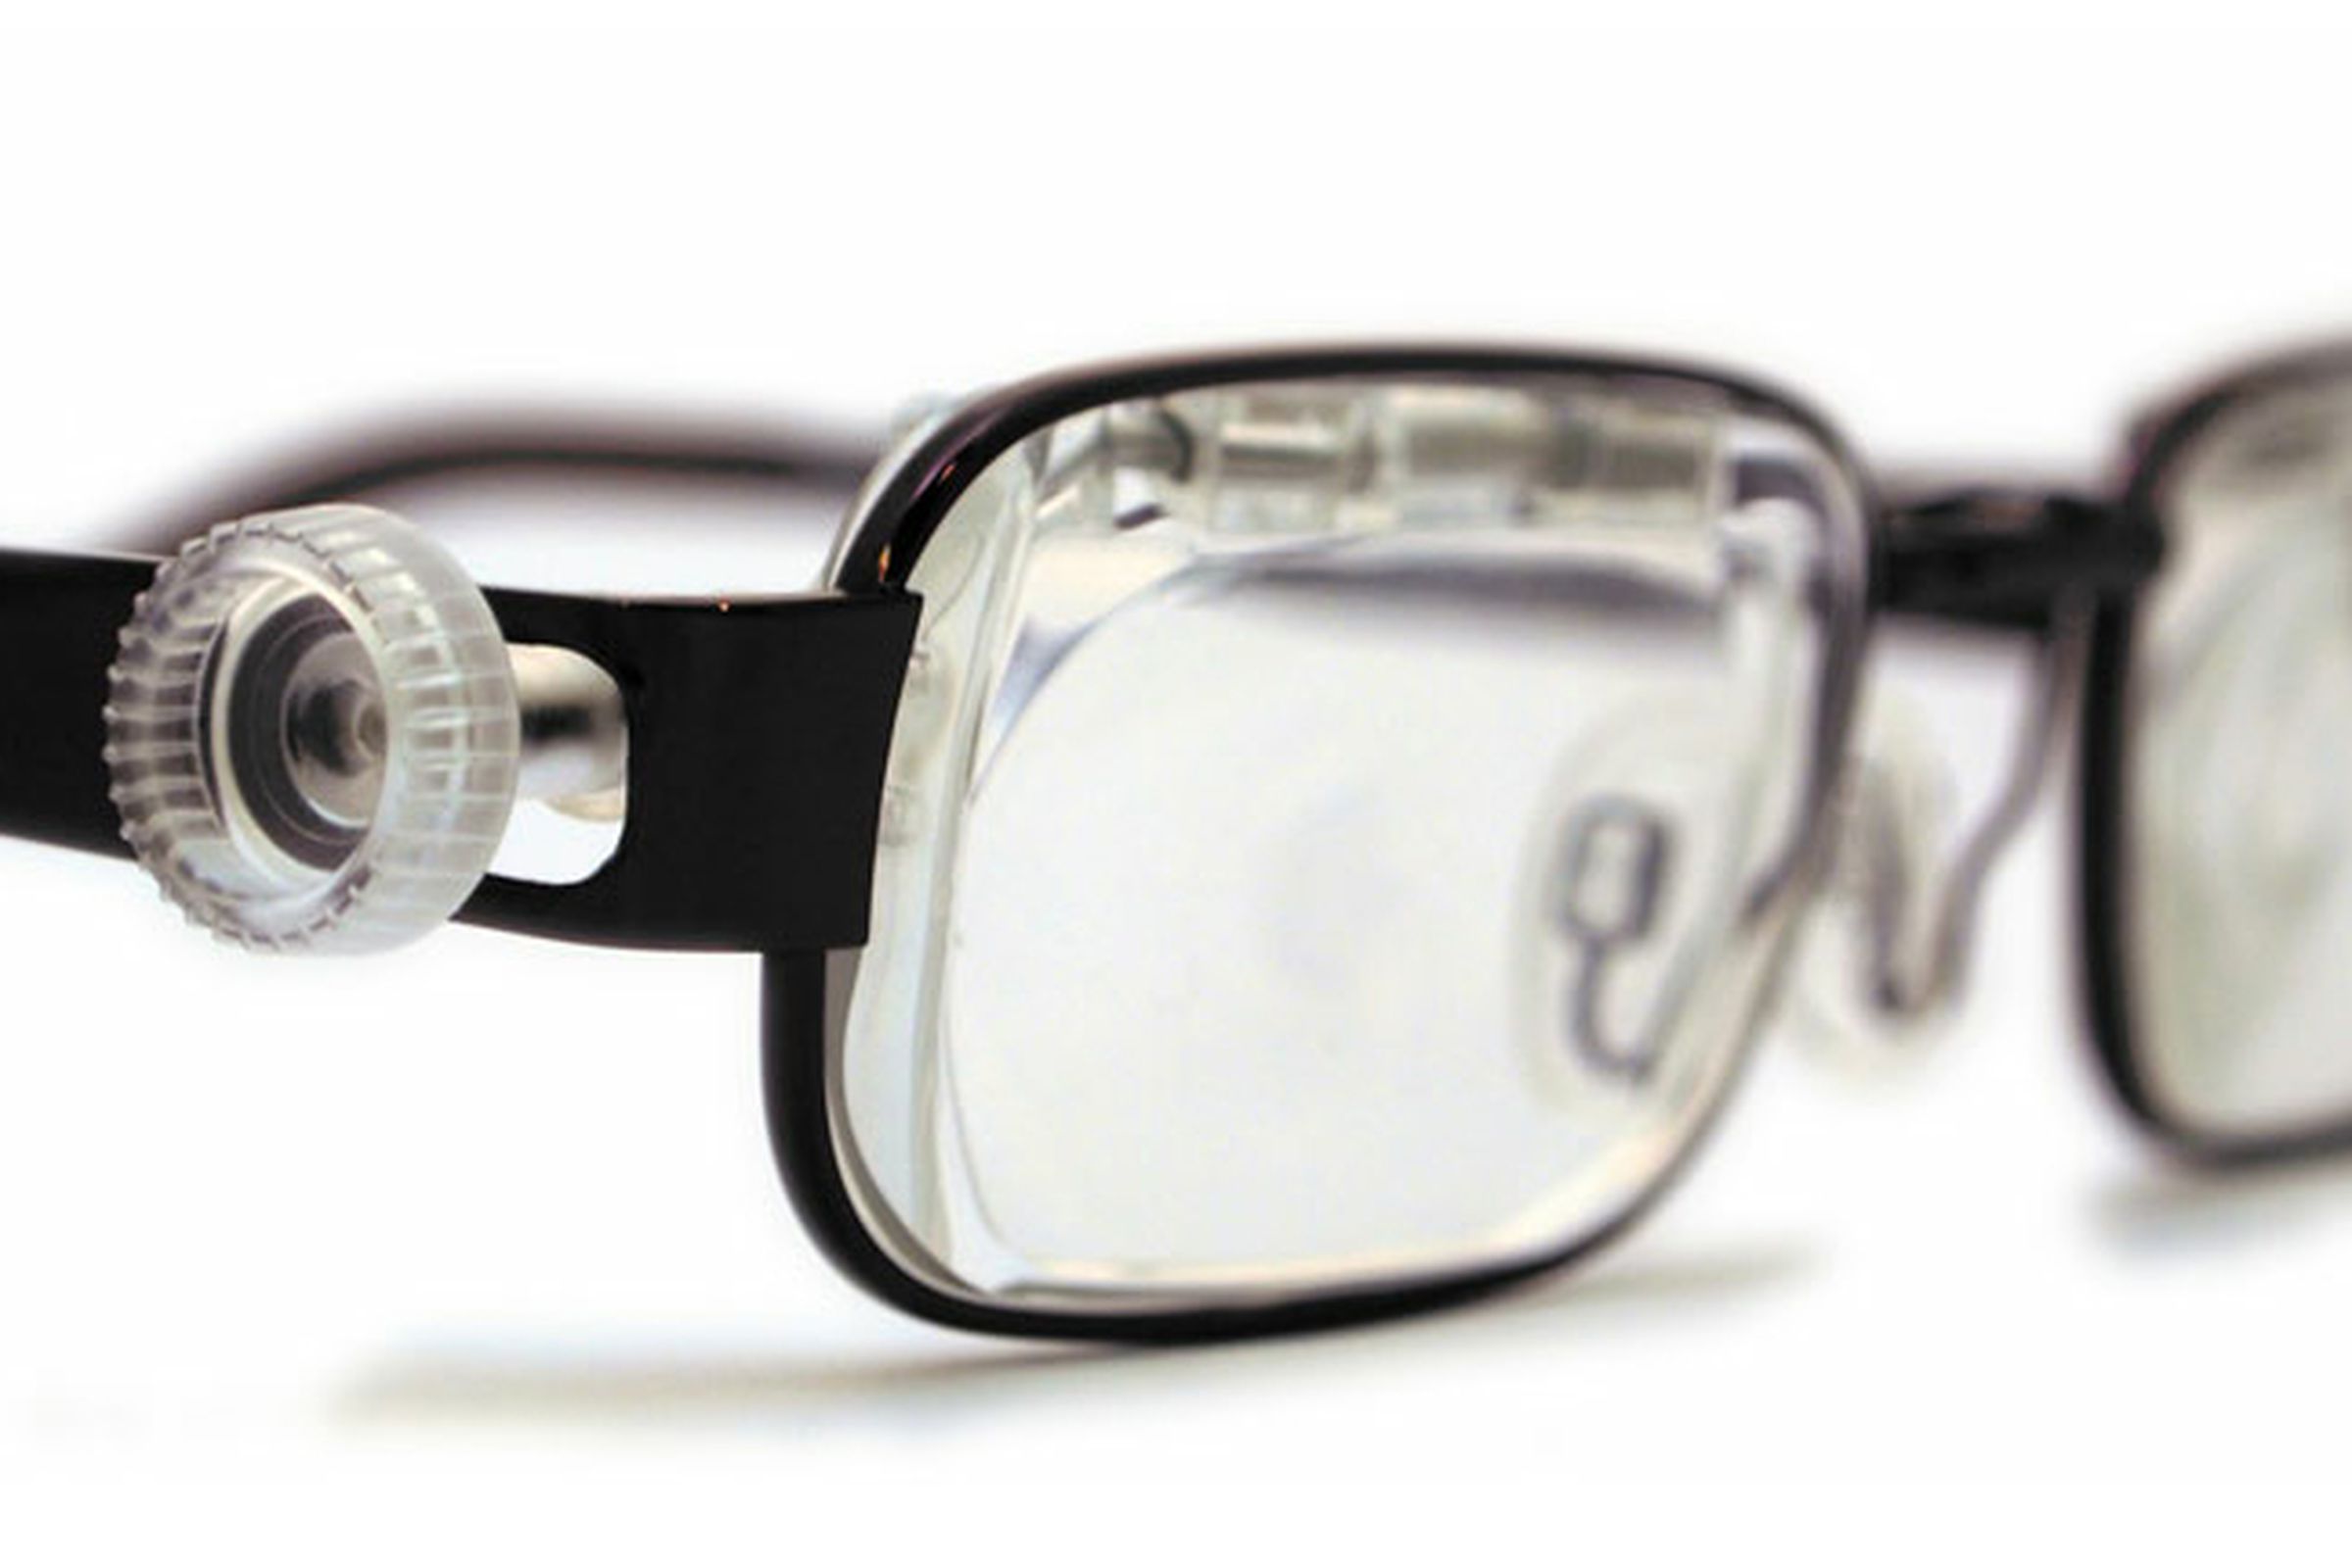 eyejusters glasses